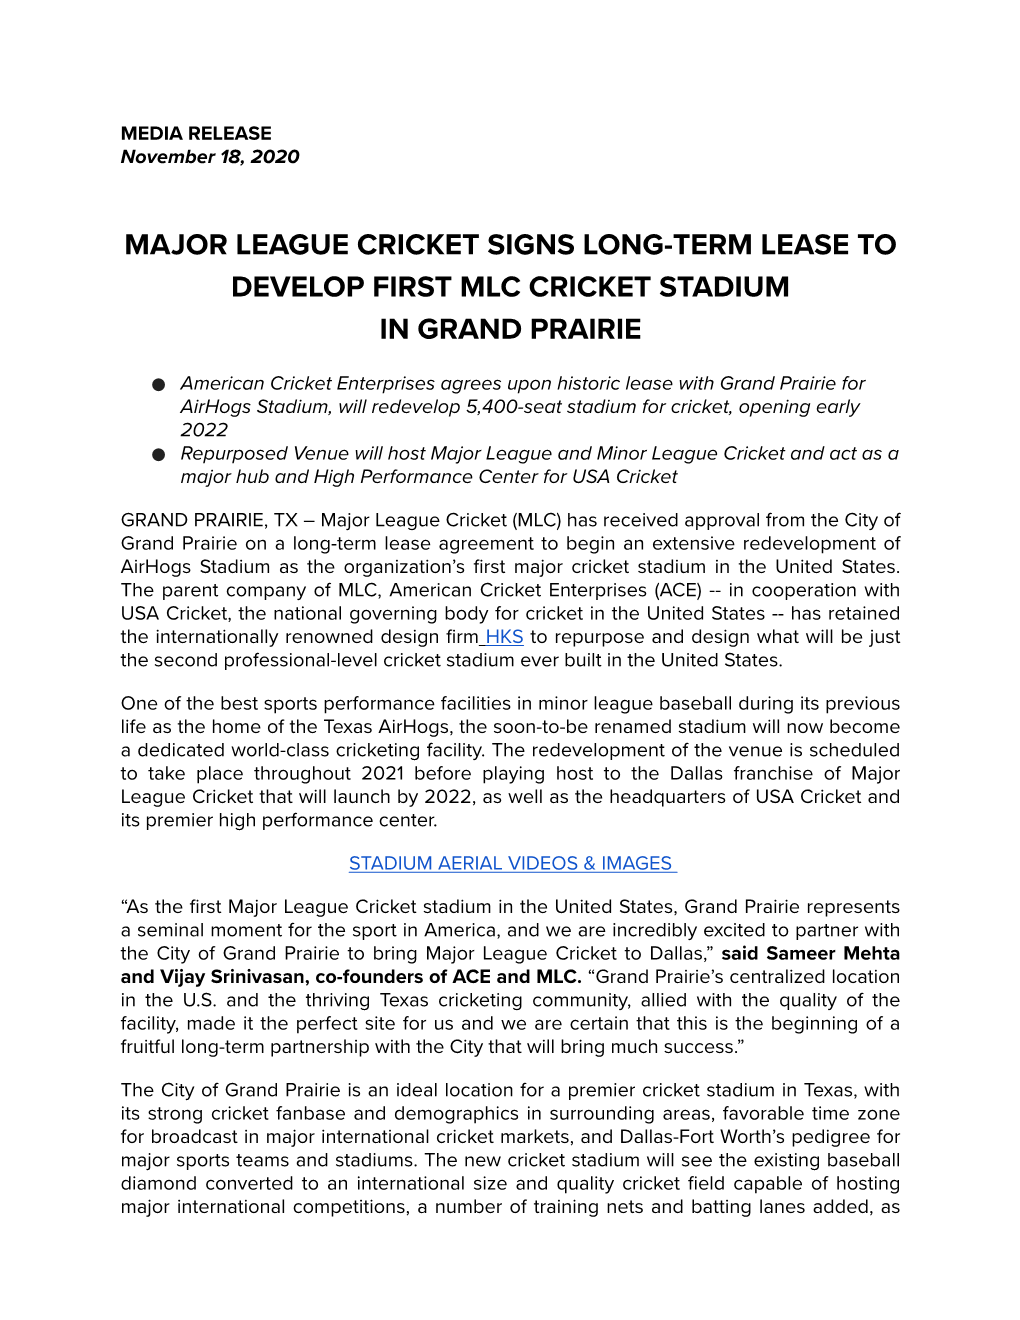 161120 Major League Cricket Signs Long-Term Lease to Develop Its First